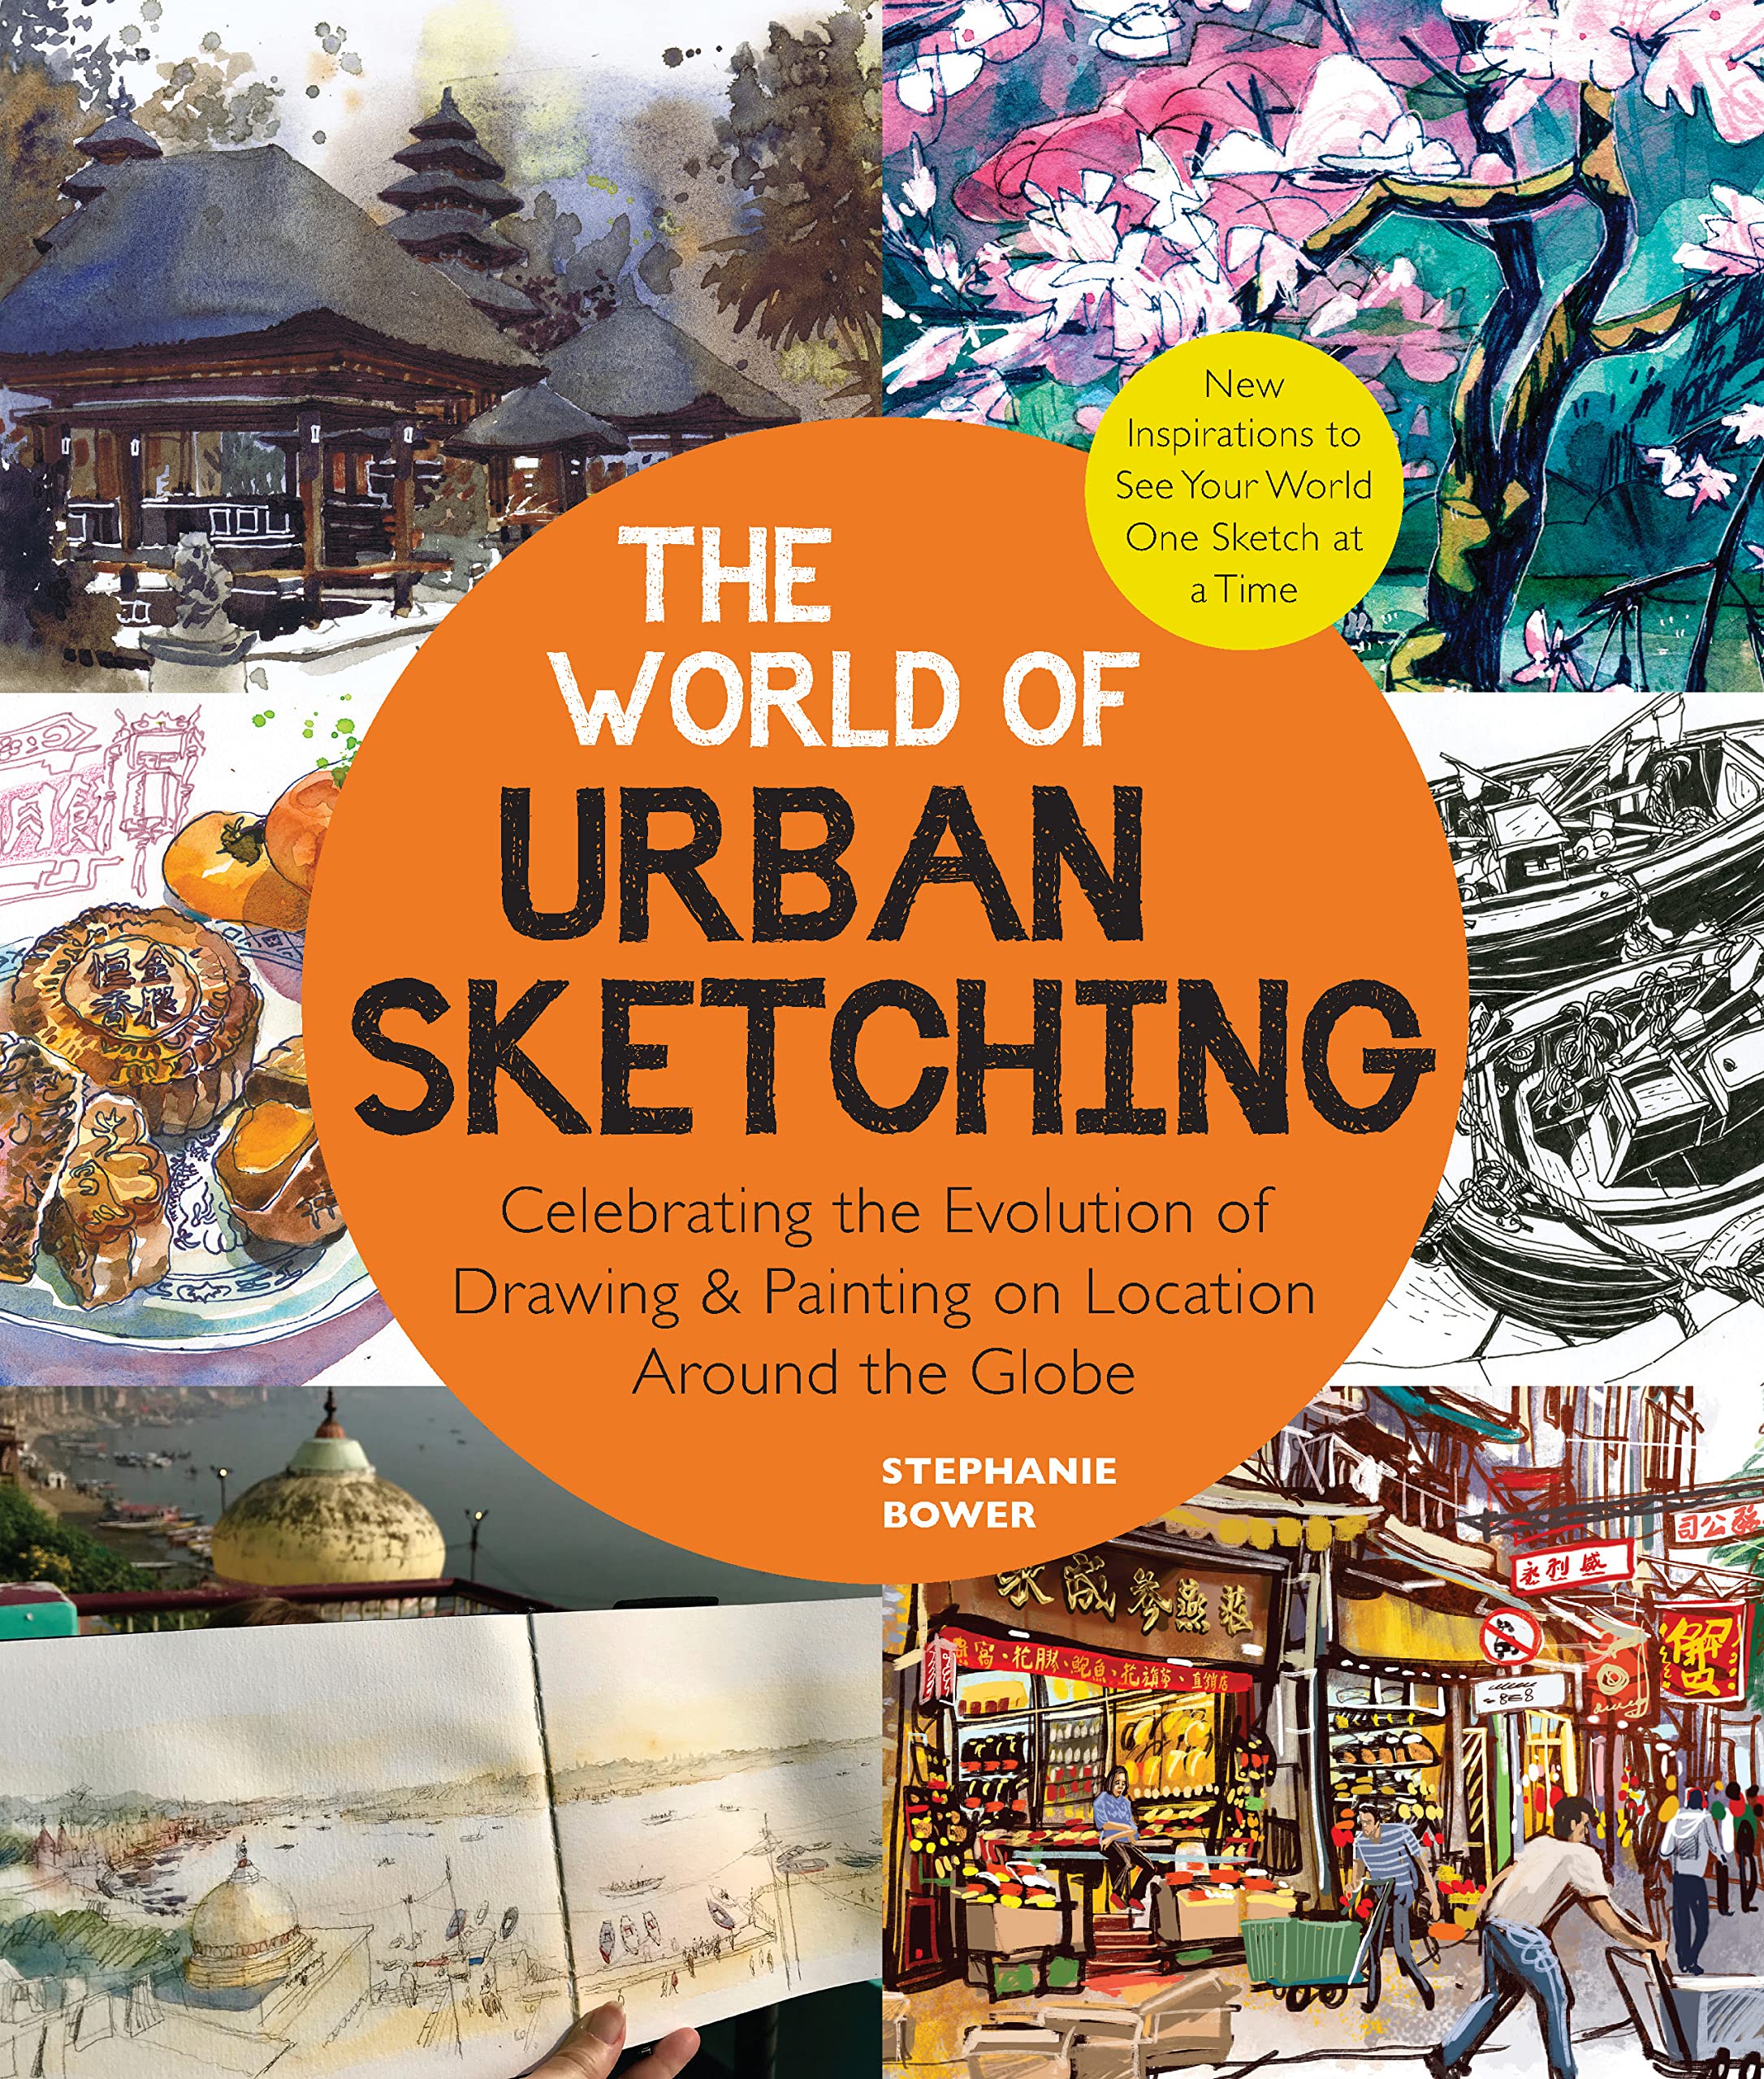 The World of Urban Sketching: Celebrating the Evolution of Drawing and Painting on Location Around the Globe - New Inspirations to See Your World One Sketch at a Time